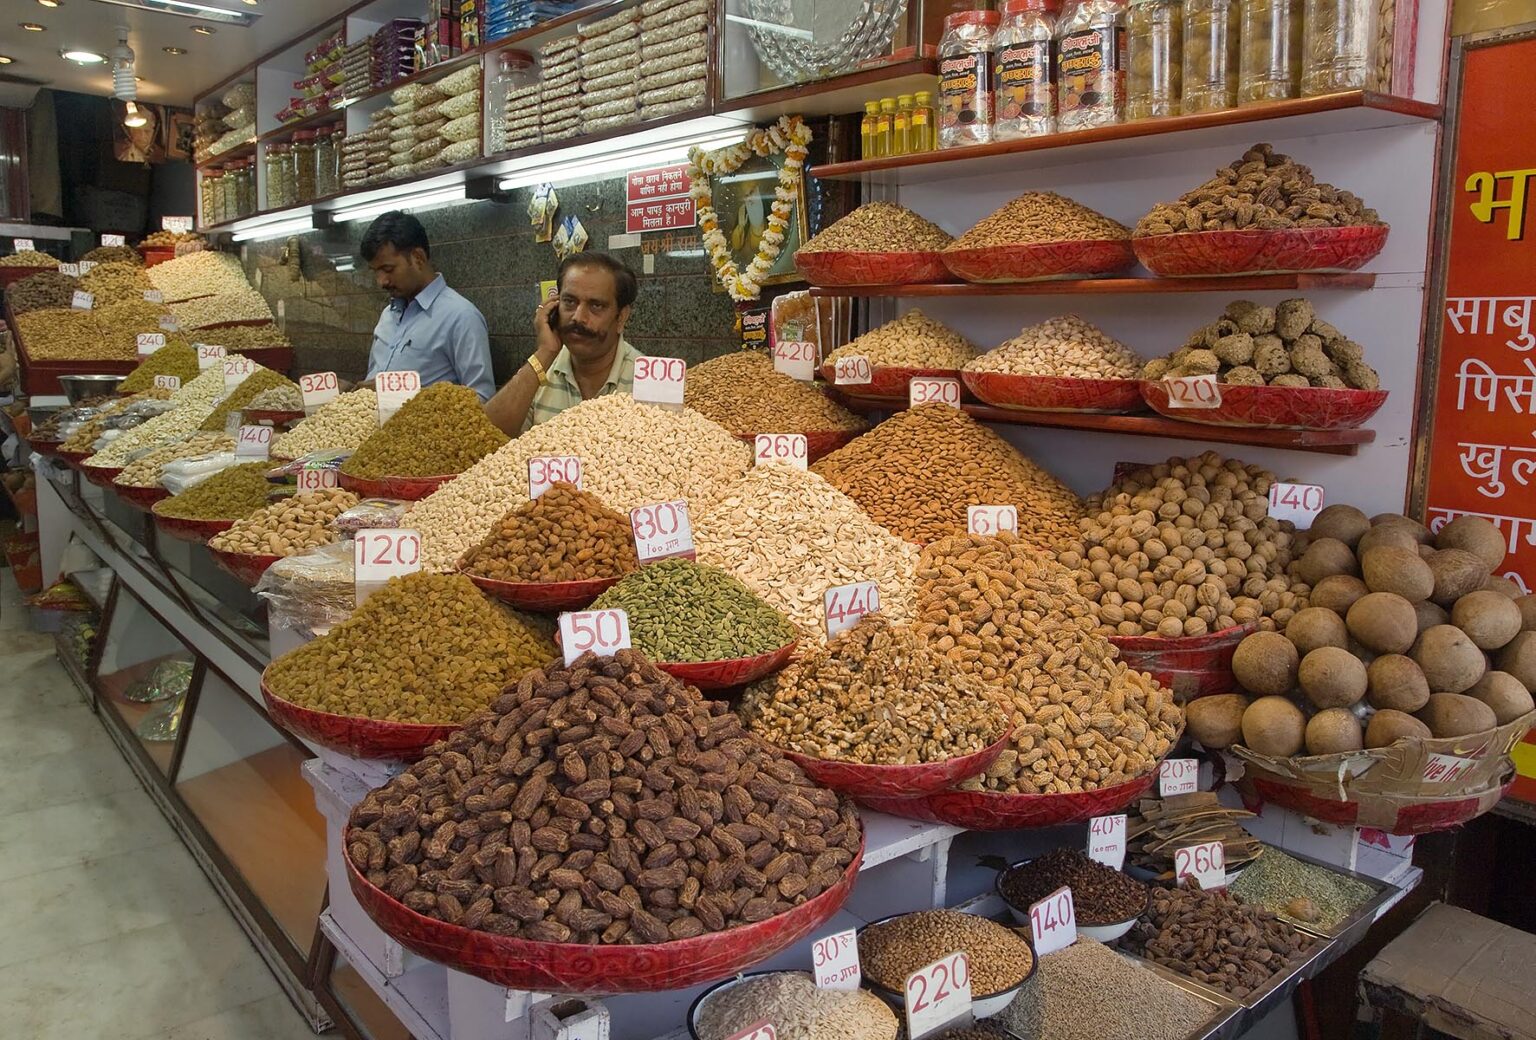 INDIAN MERCHANTS sell spices and dried fruit in the SPICE MARKET of CHANDNI CHOWK OLD DELHI - INDIA